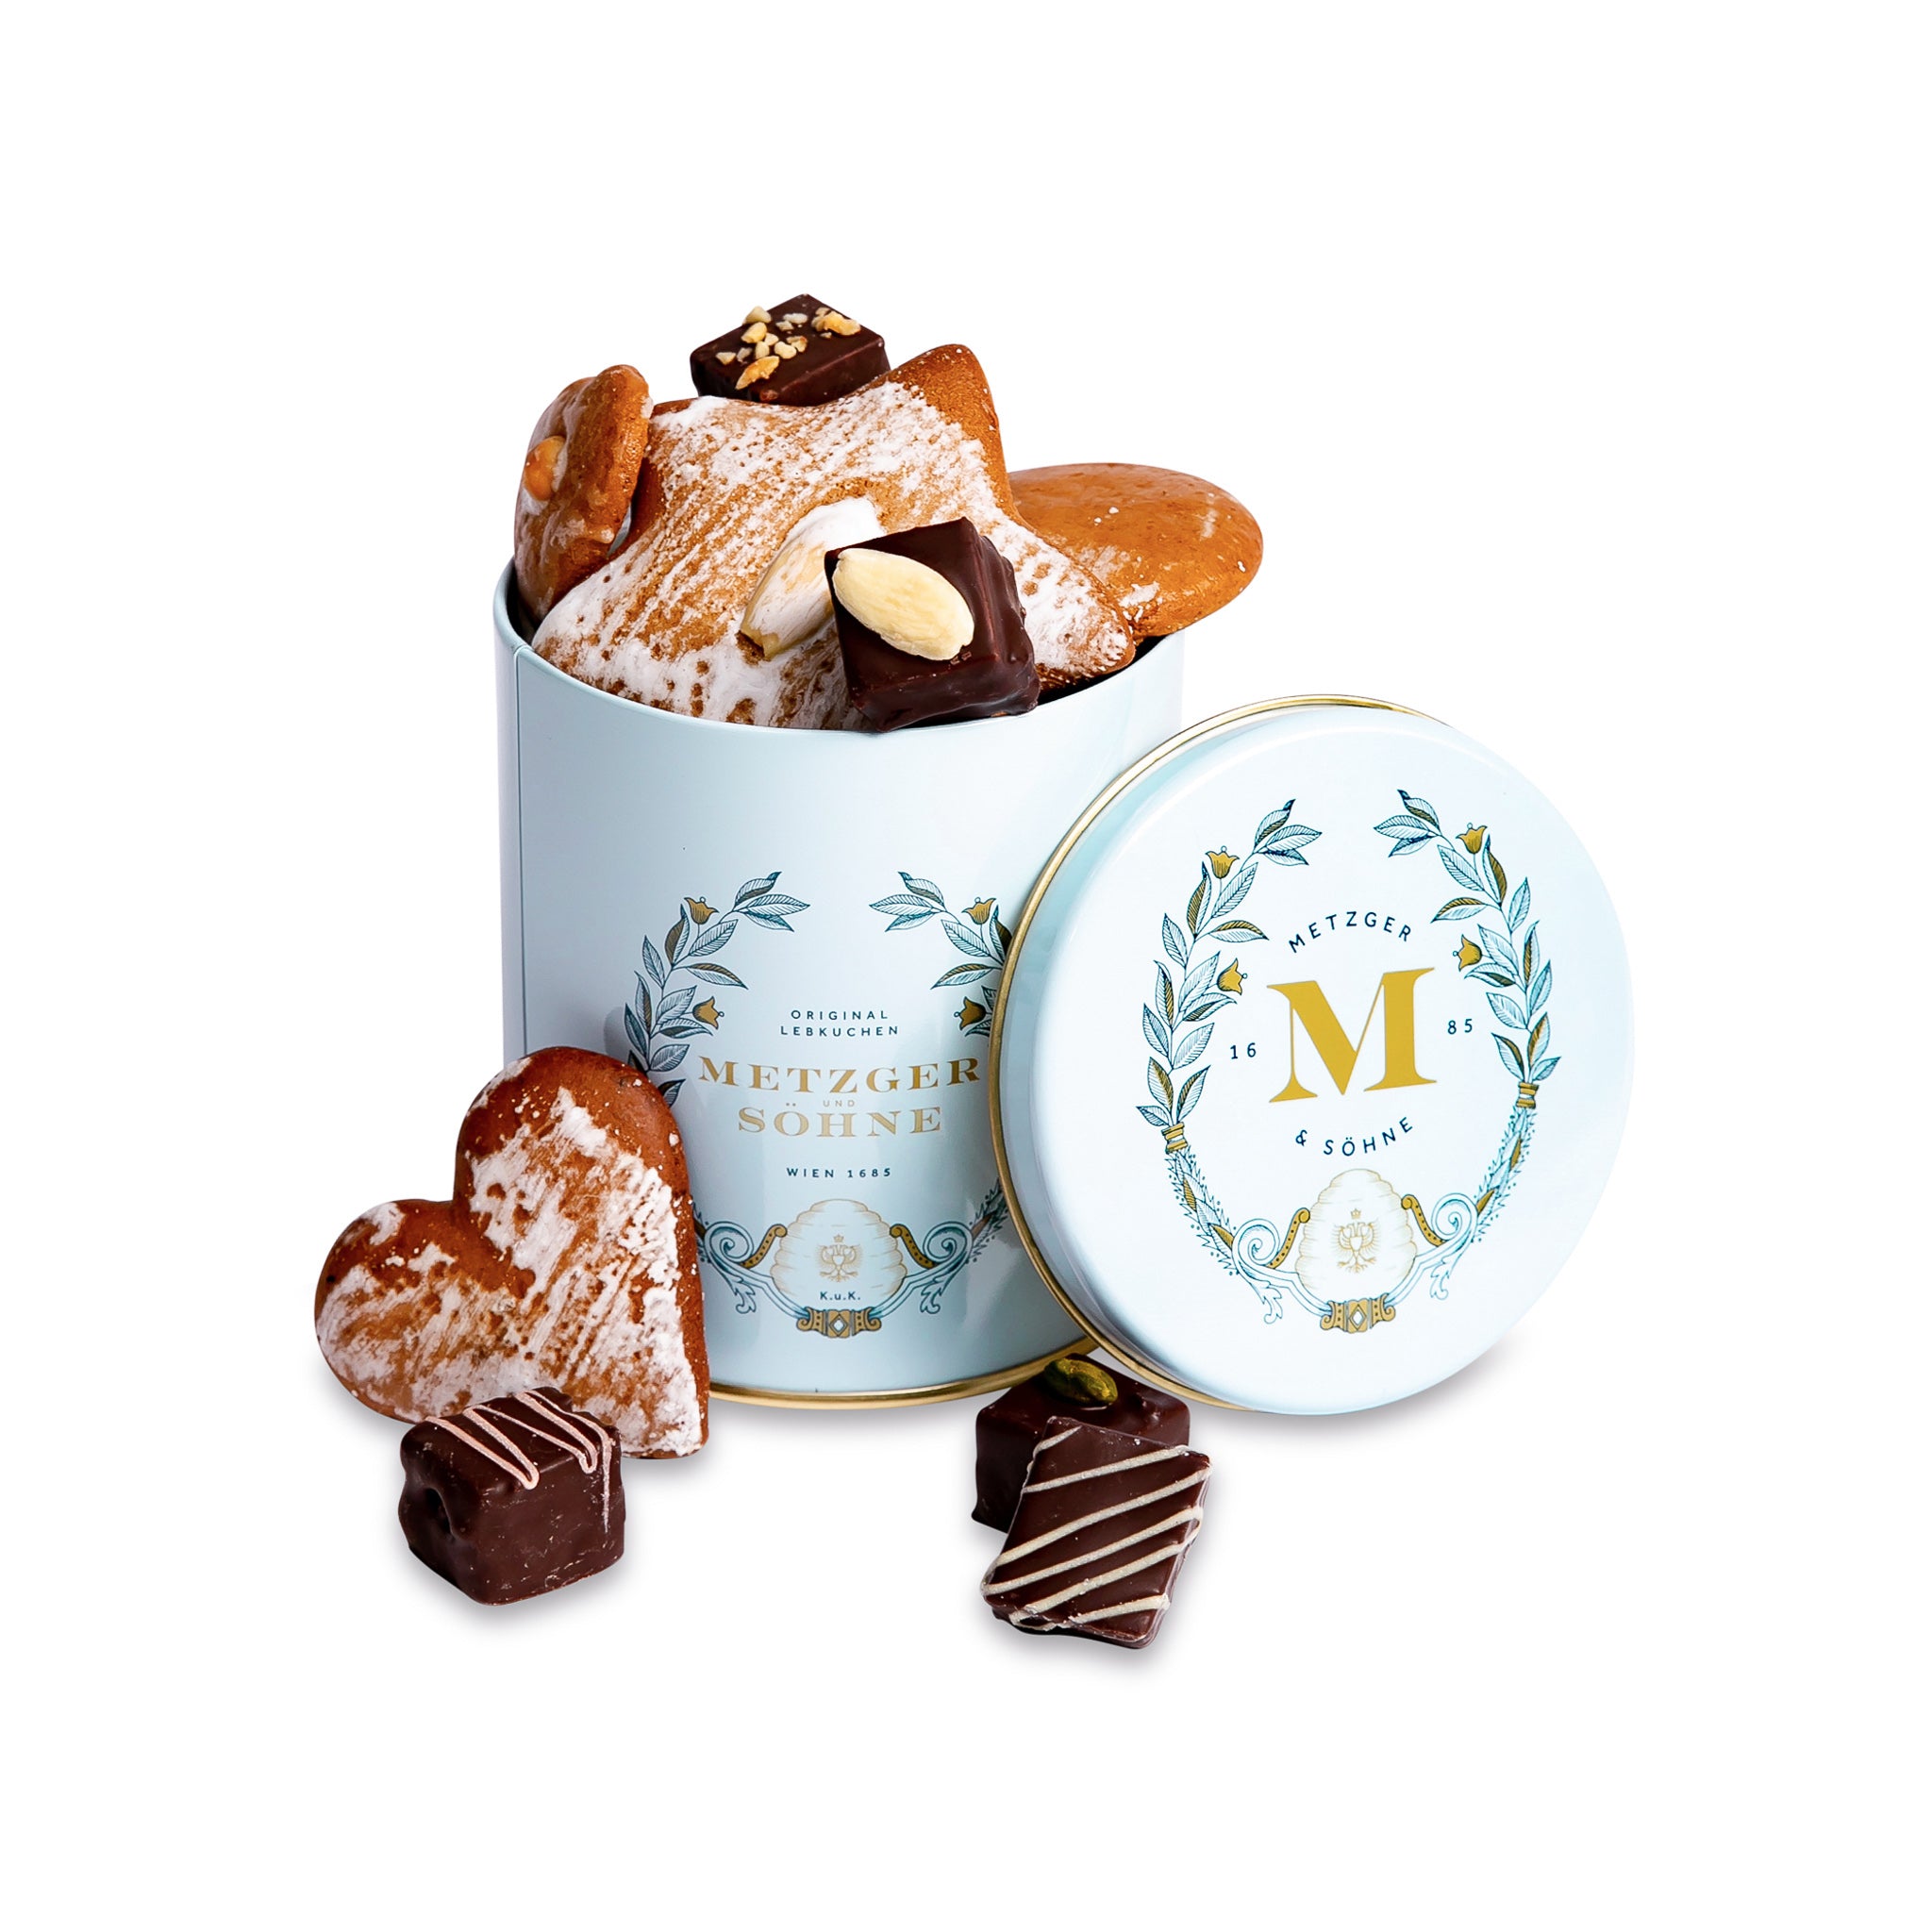 Luxury Metzger gift tin in blue, filled with our popular Lebkuchen cookies and chocolate pralines. There are 10 opulent praline types, from marzipan mixes to fruit jellies, jams and nut fillings, coated in chocolate. The Lebkuchen cookies include our fruit bread with dried fruits and nuts, basler with a cherry undertone, chocolate robbins, signature house Lebkuchen and Aranzini Lebkuchen minis. A perfect Lebkuchen taster gift or selection for the Christmas table.